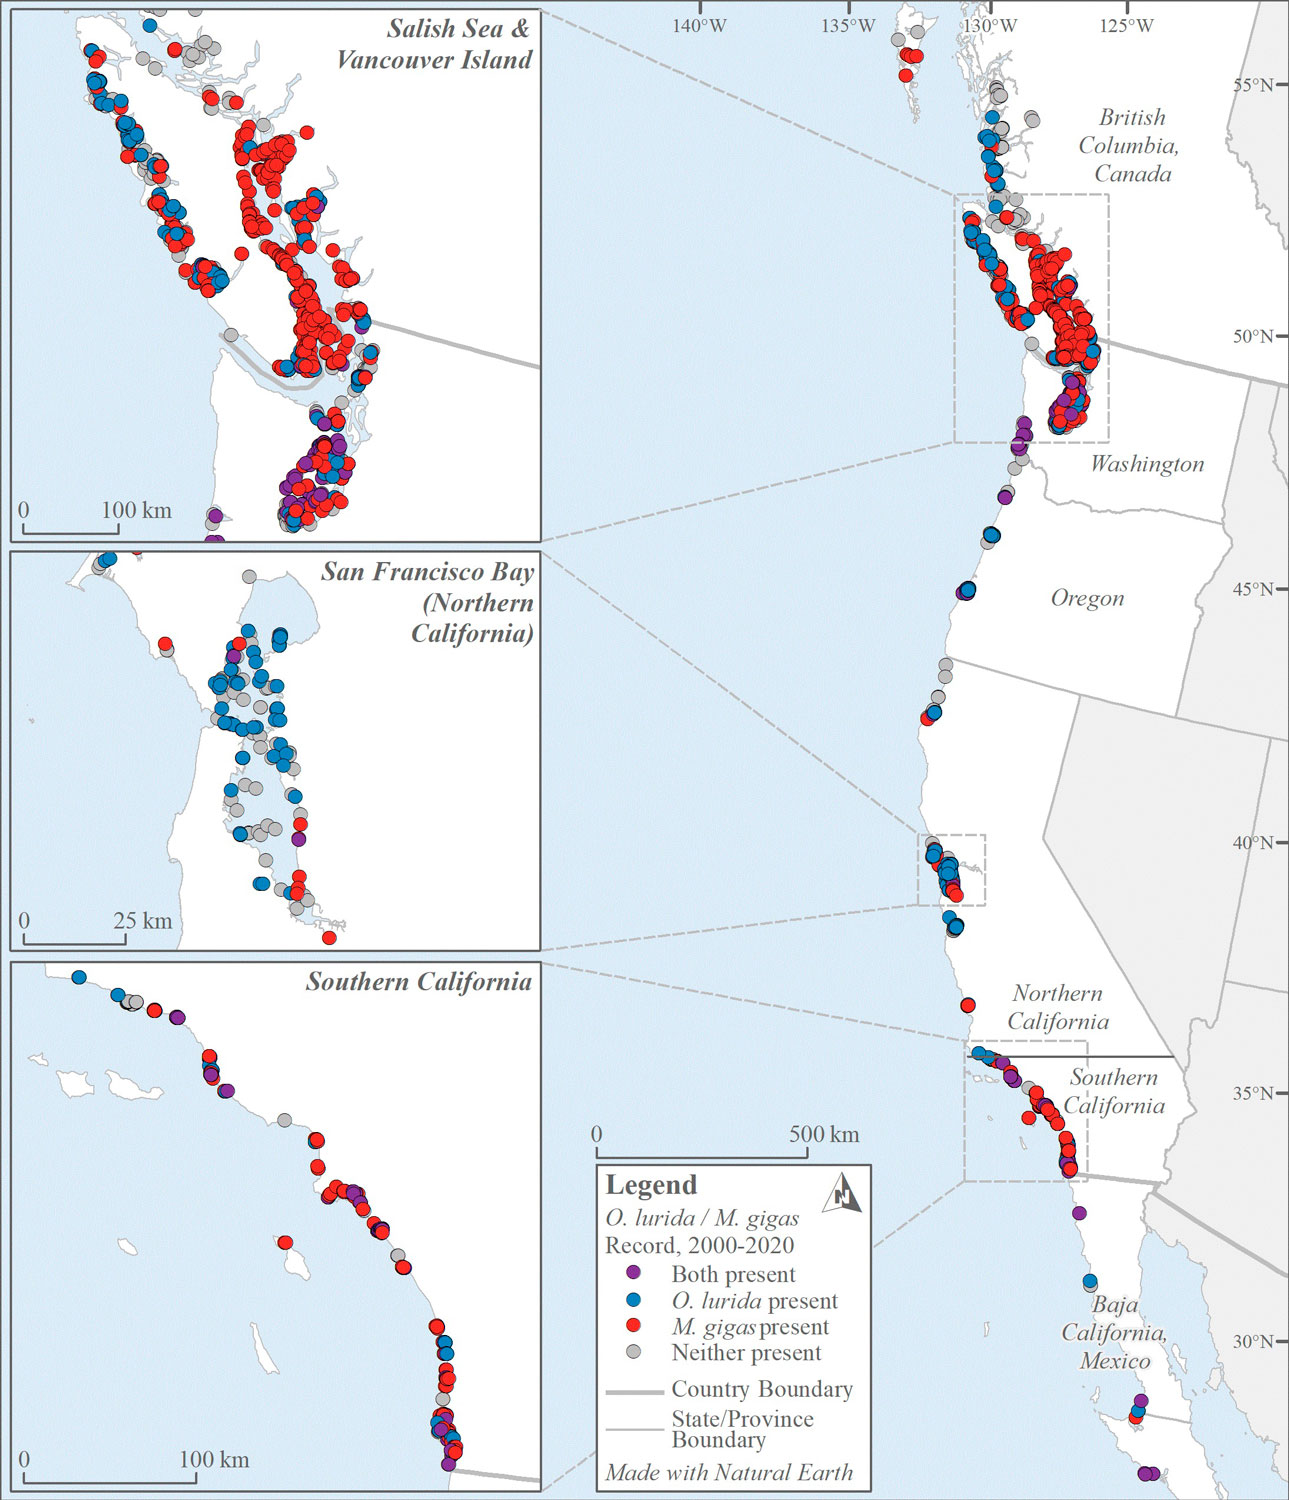 Maps of the West Coast show where Olympia oysters and Pacific oysters are present. Pacific oysters are more prevalent.